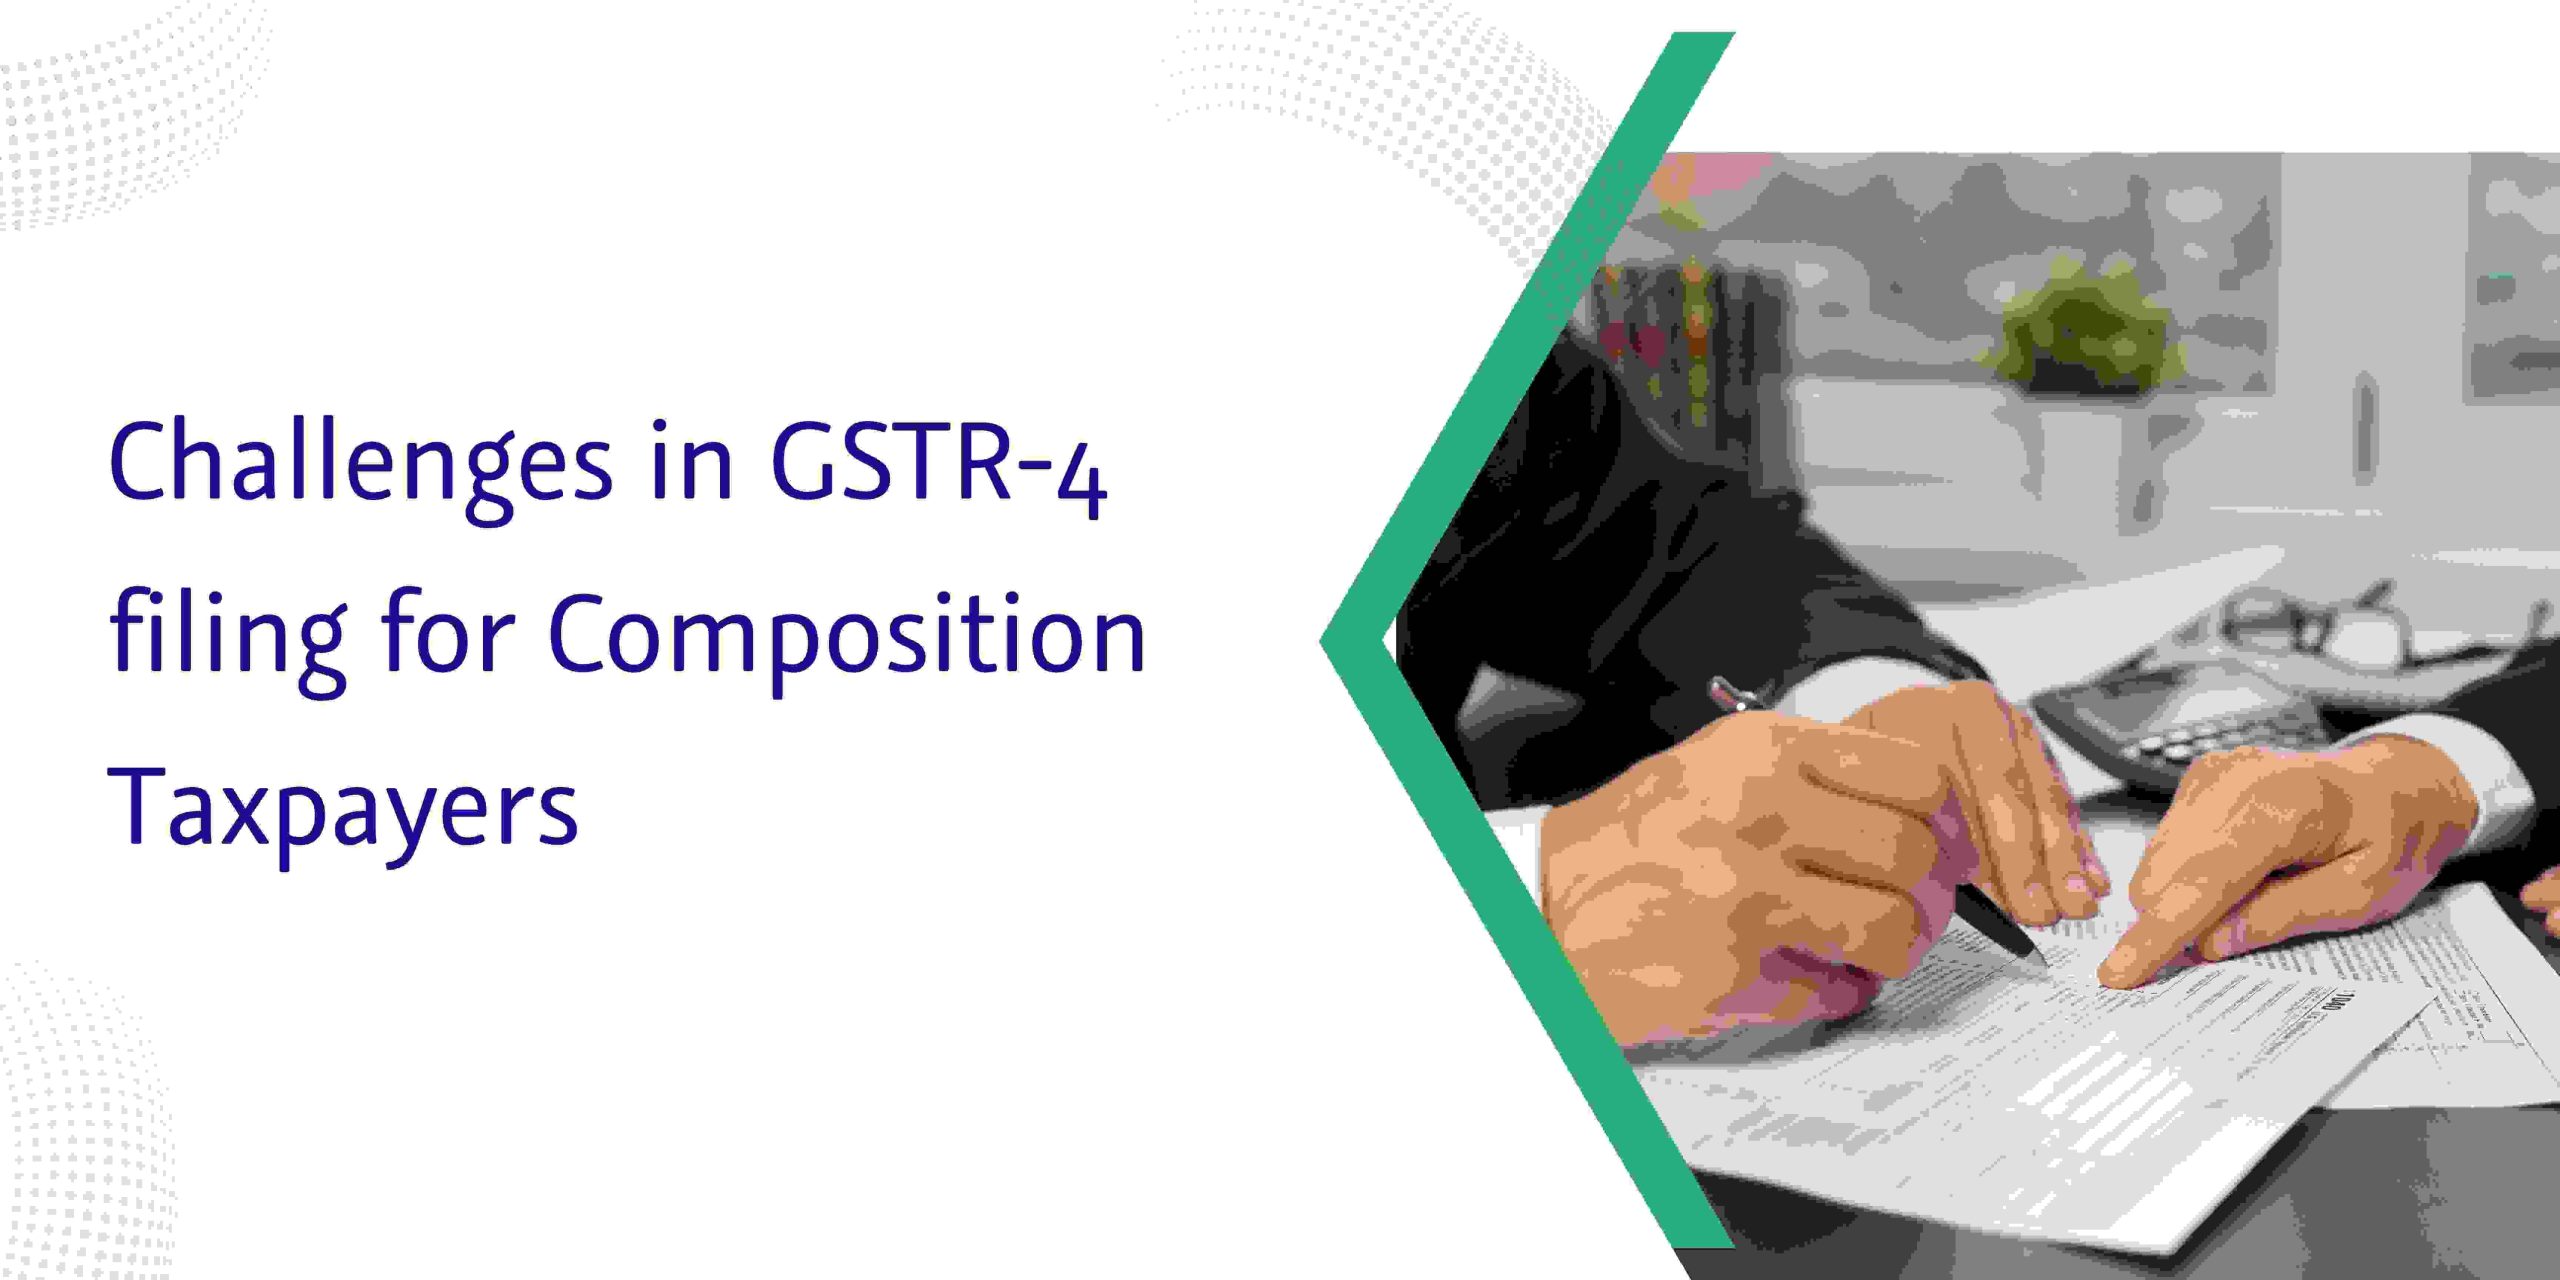 CaptainBiz: Challenges in GSTR-4 filing for Composition Taxpayers